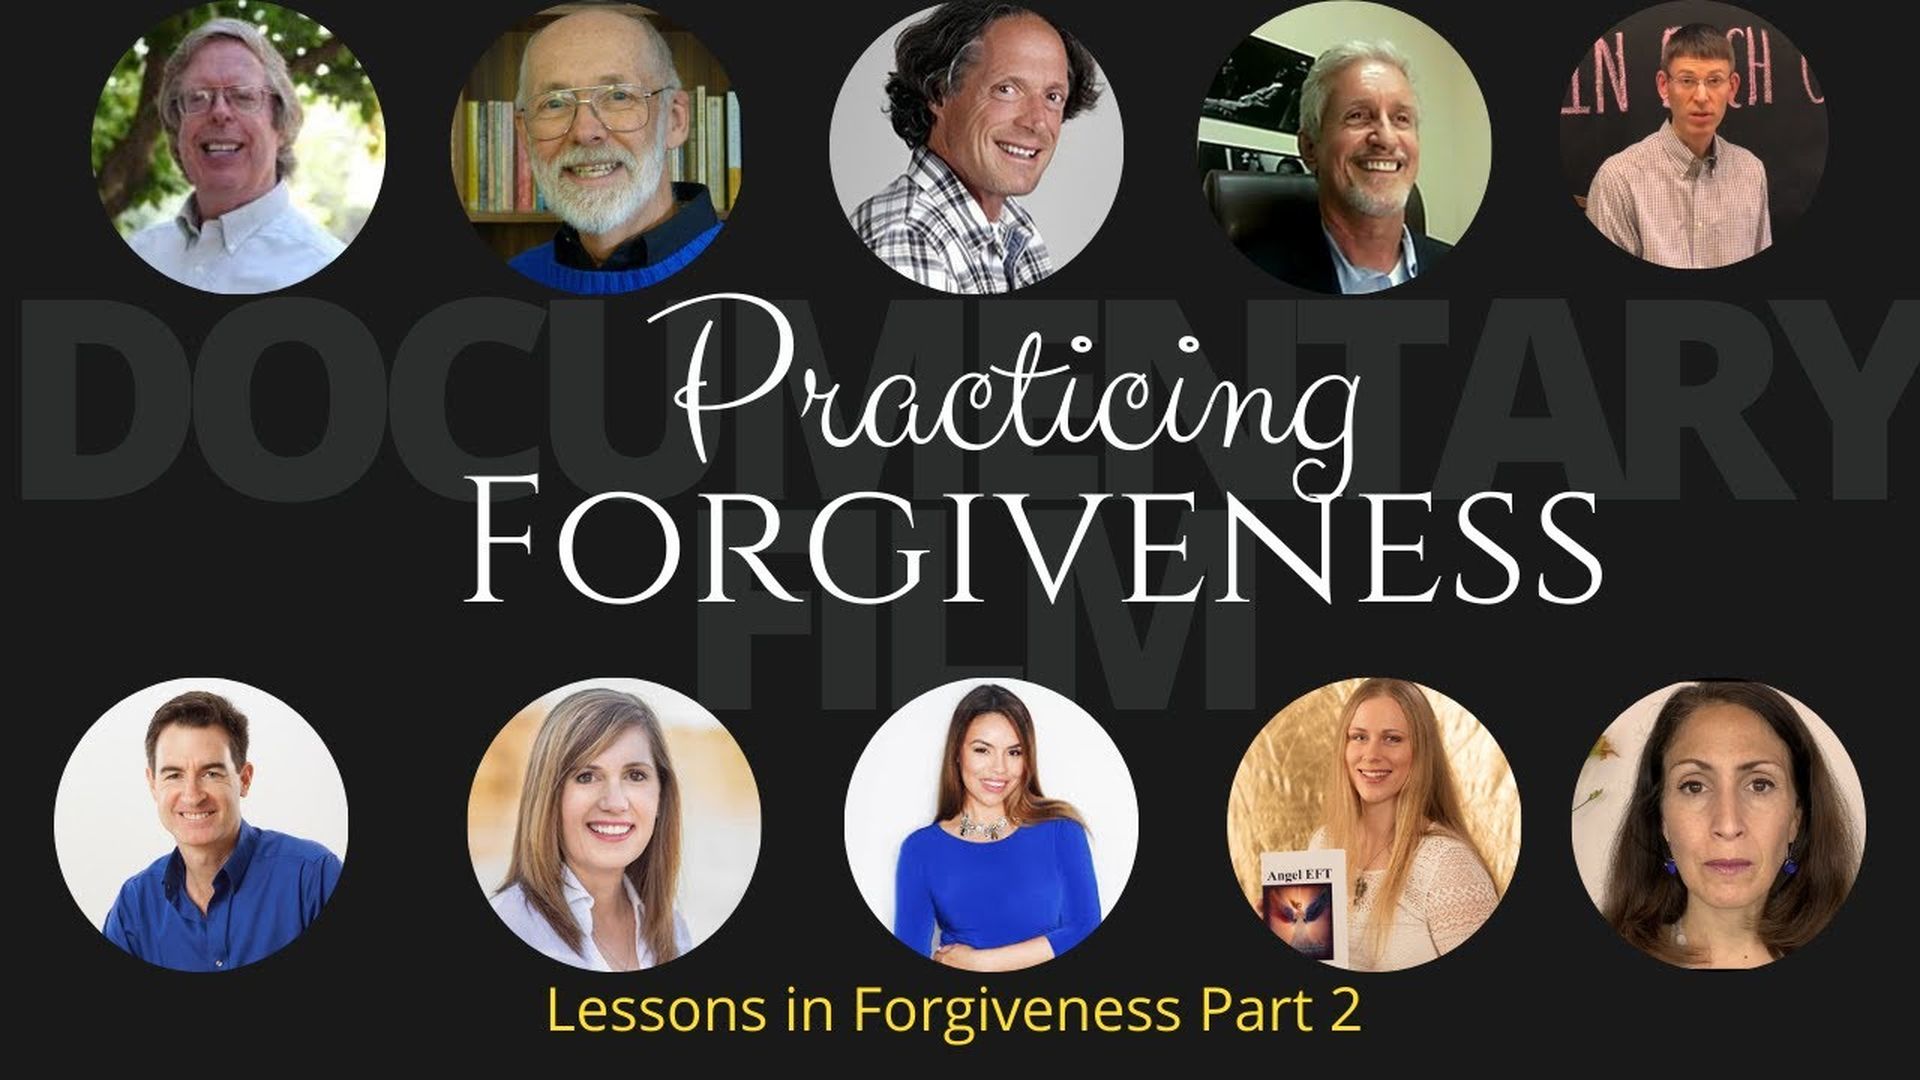 Lessons in Forgiveness (Part 2)